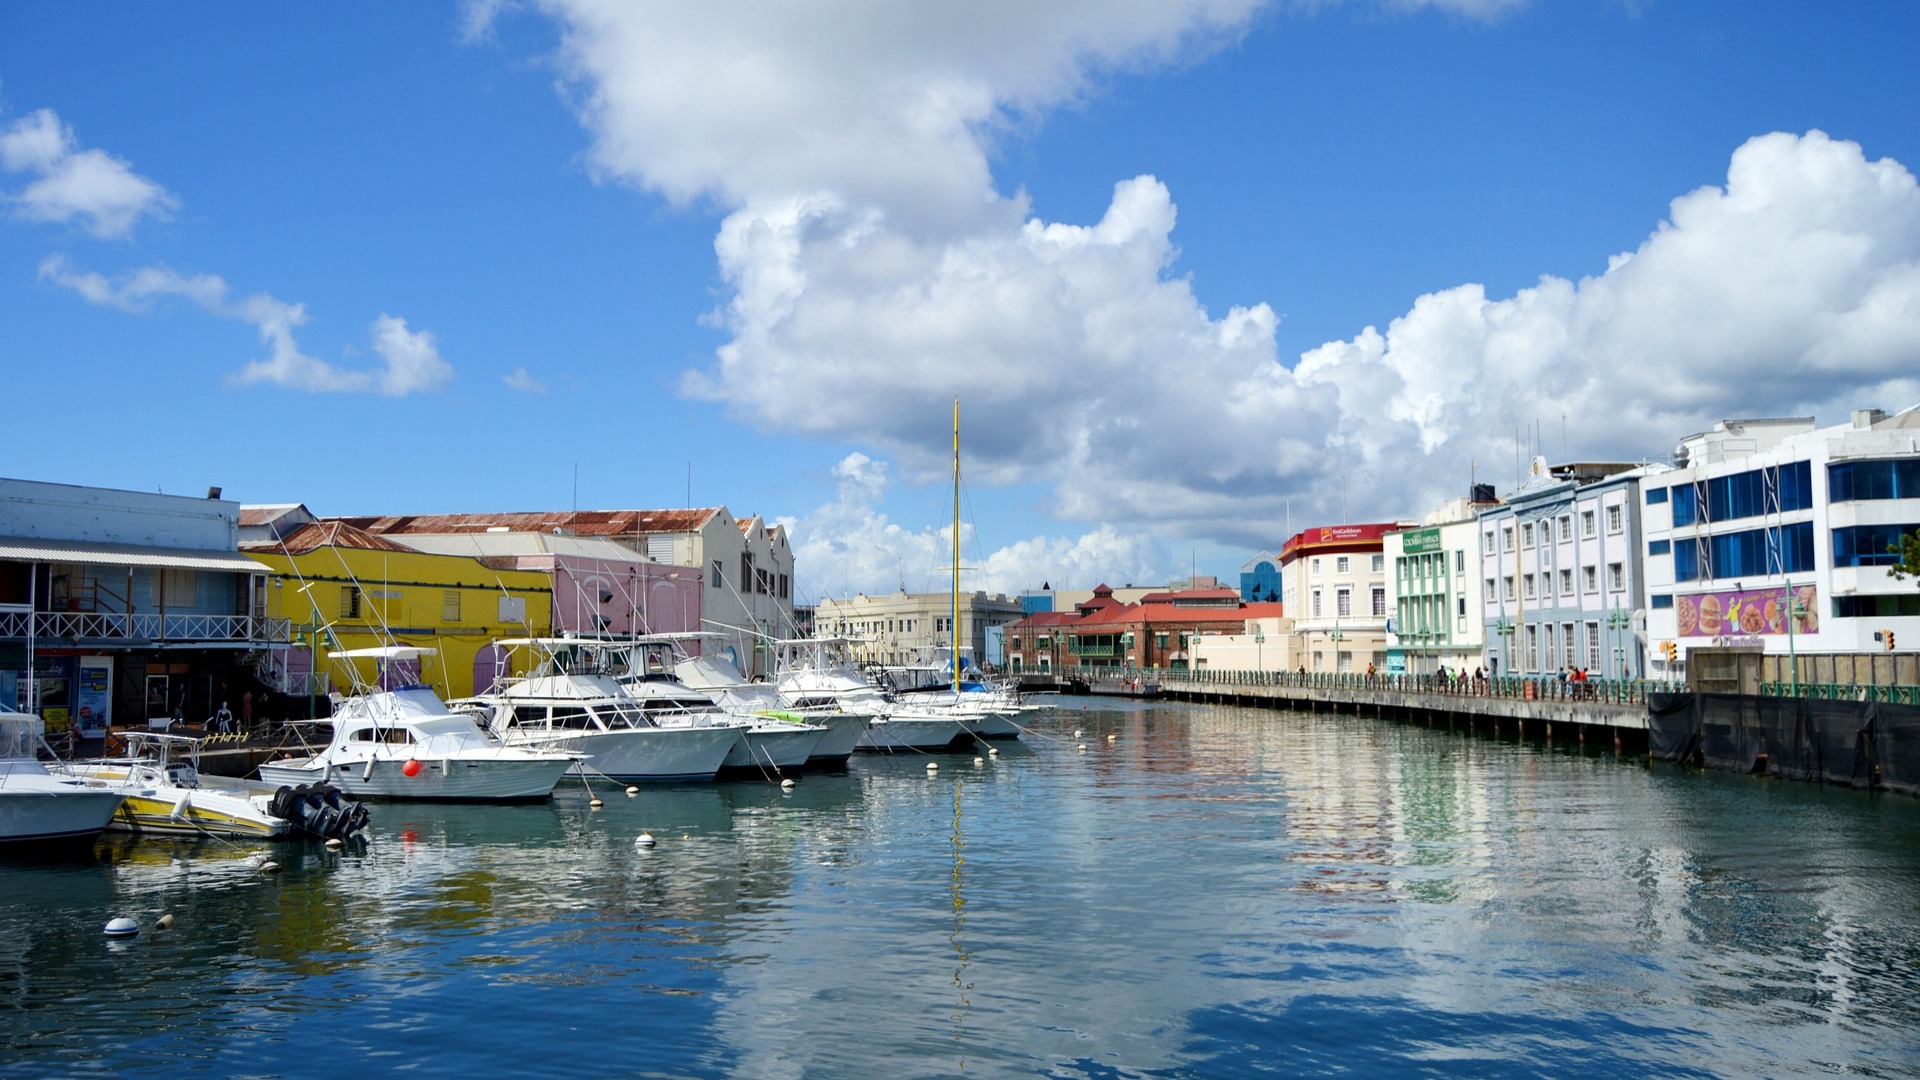 Two Days in Bridgetown Barbados, a Detailed Itinerary -Two Days in